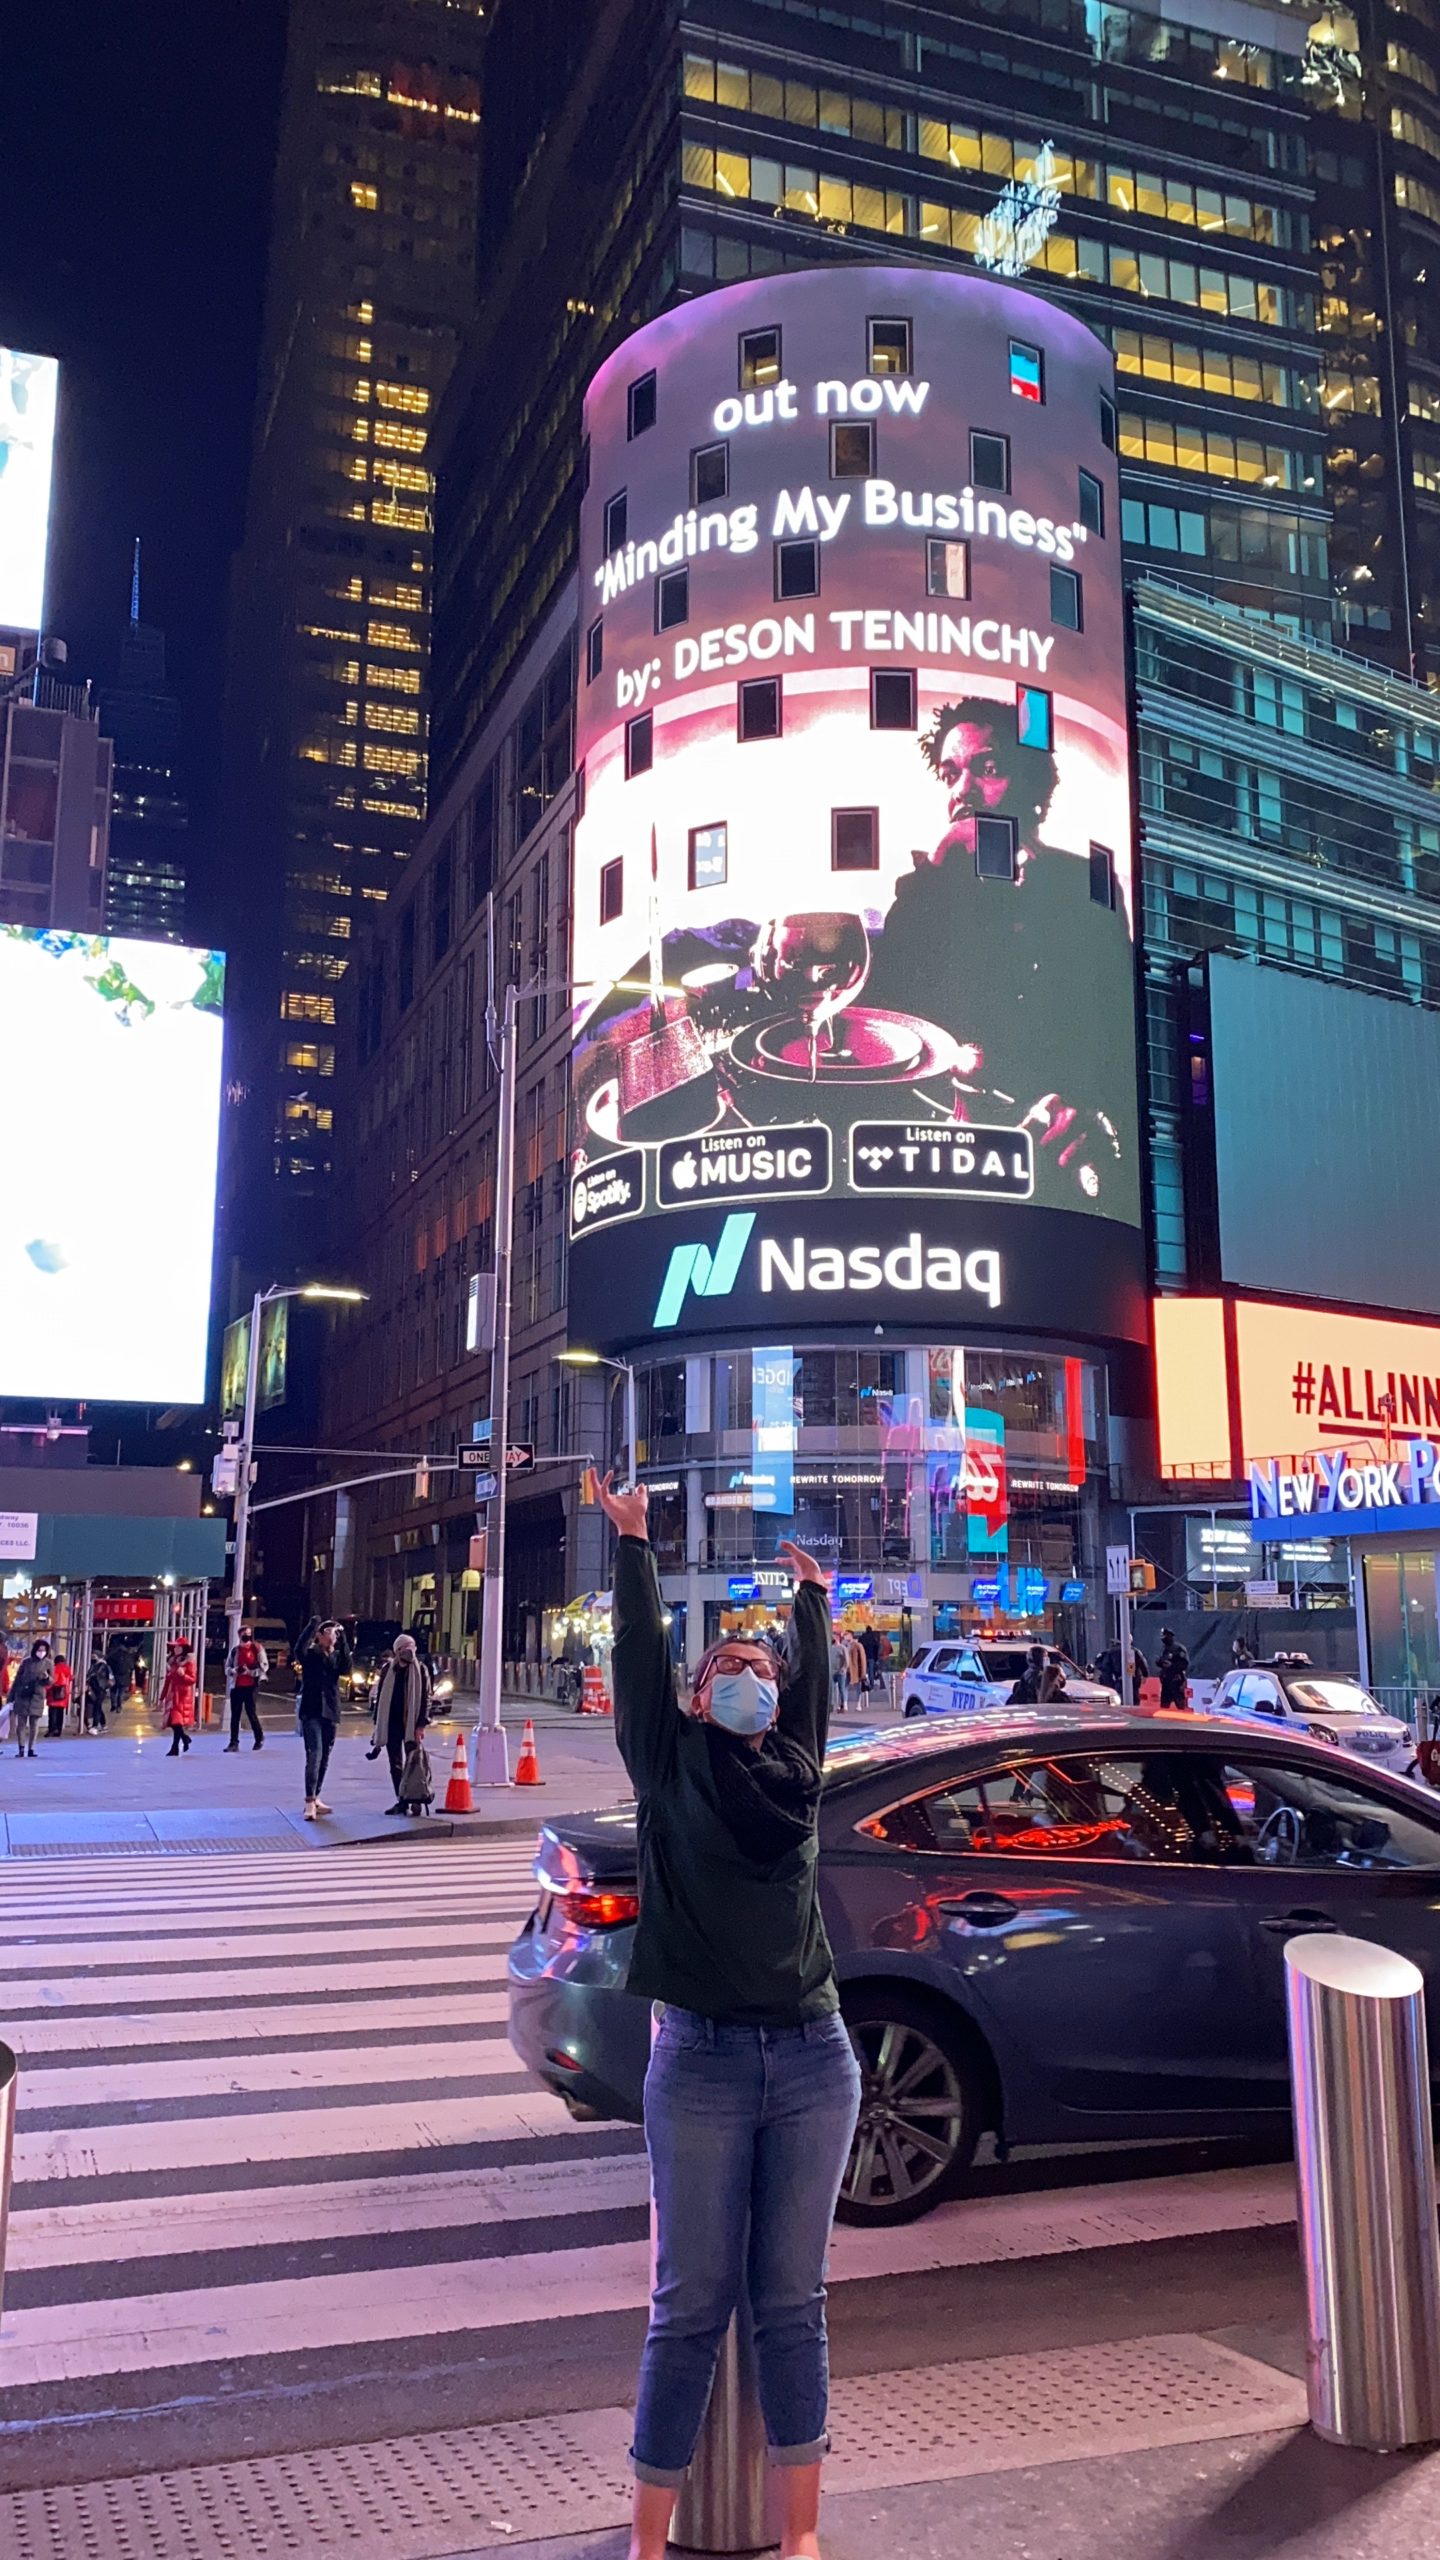 Ana Ramos, former County Prep student, Designs a Billboard Displayed in Times Square